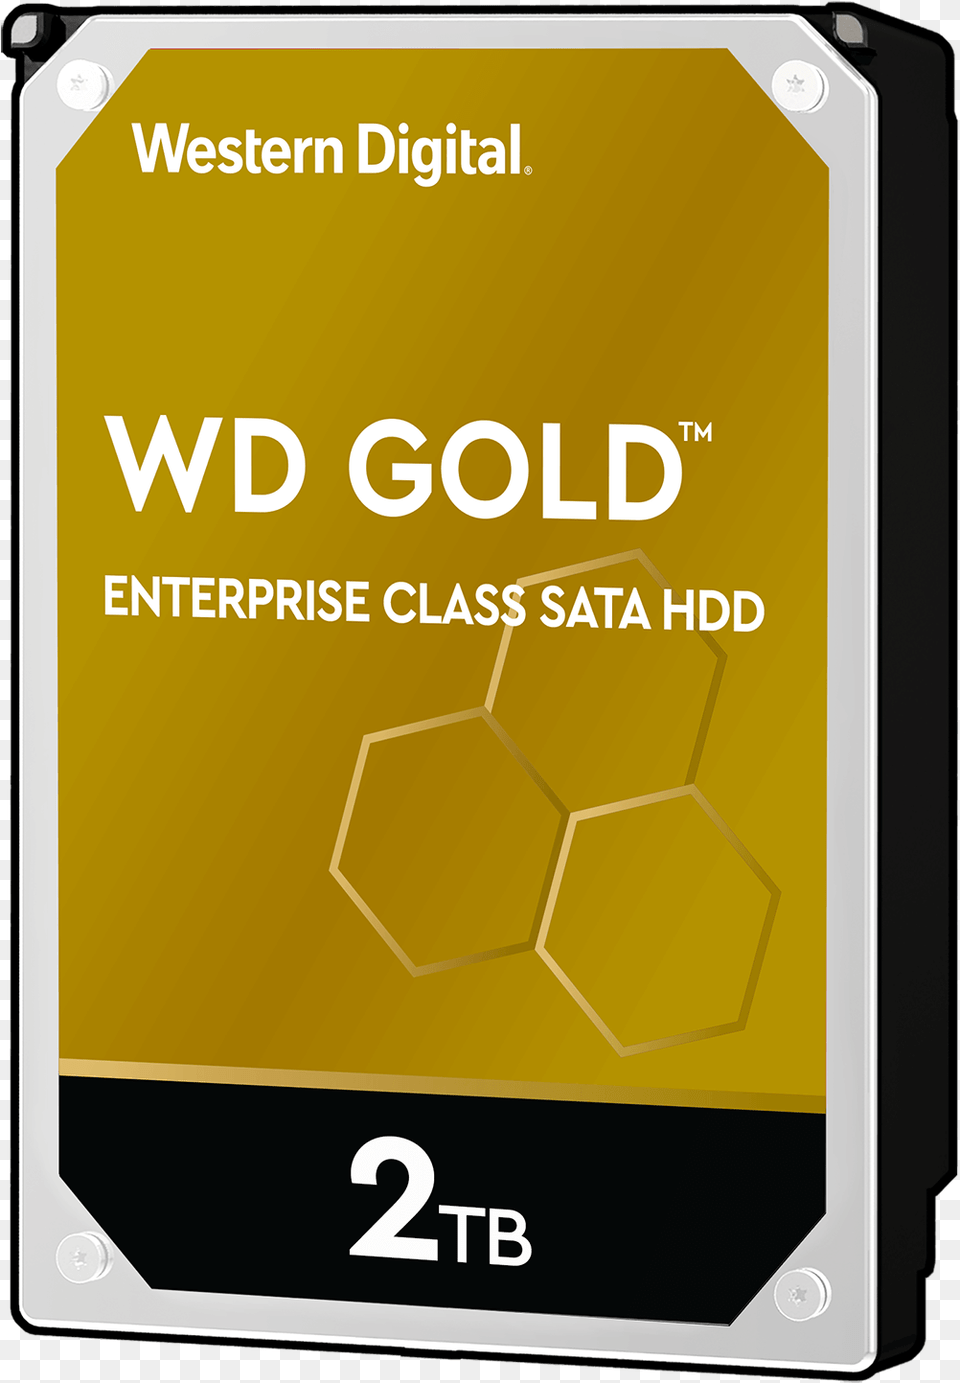 Wd Gold Enterprise Class Sata Hdd 1tb Gadget, Electronics, Phone, Mobile Phone, Computer Hardware Png Image